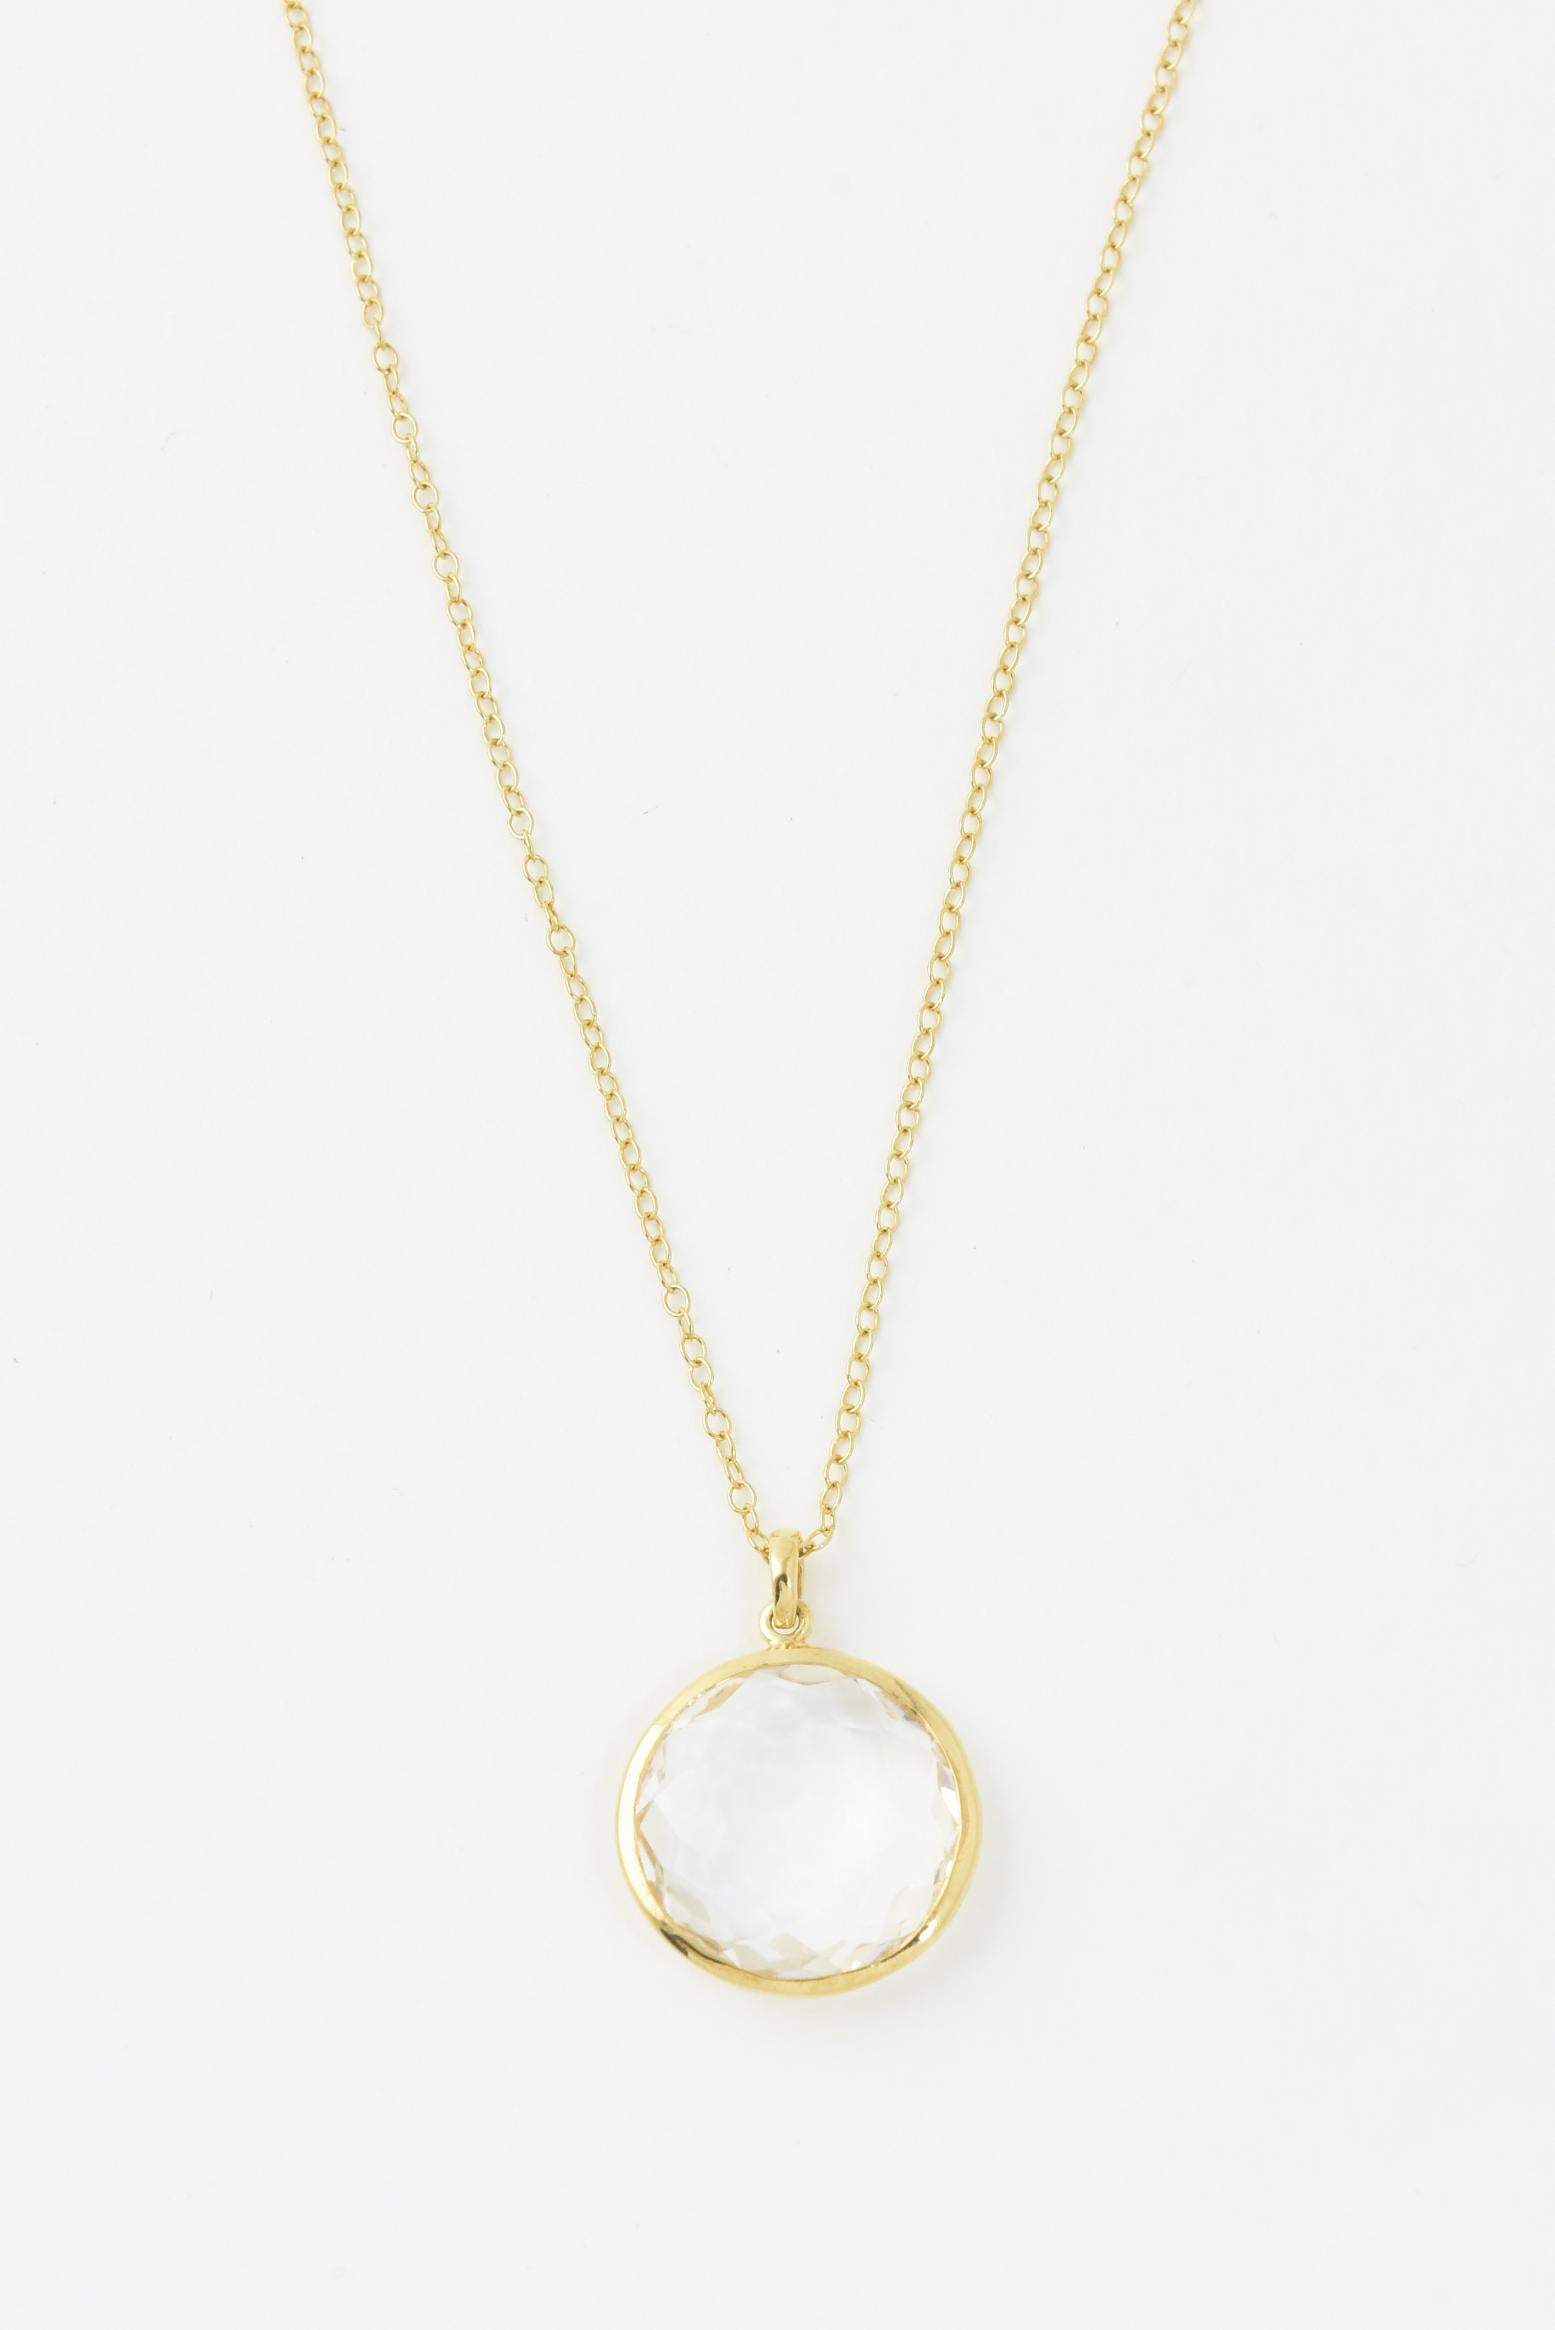 Ippolita 18k yellow gold chain with a 20mm faceted quartz drop. Lollipop Collection. 18k yellow gold round pendant features a quartz gemstone. Adjustable chain, 16-18